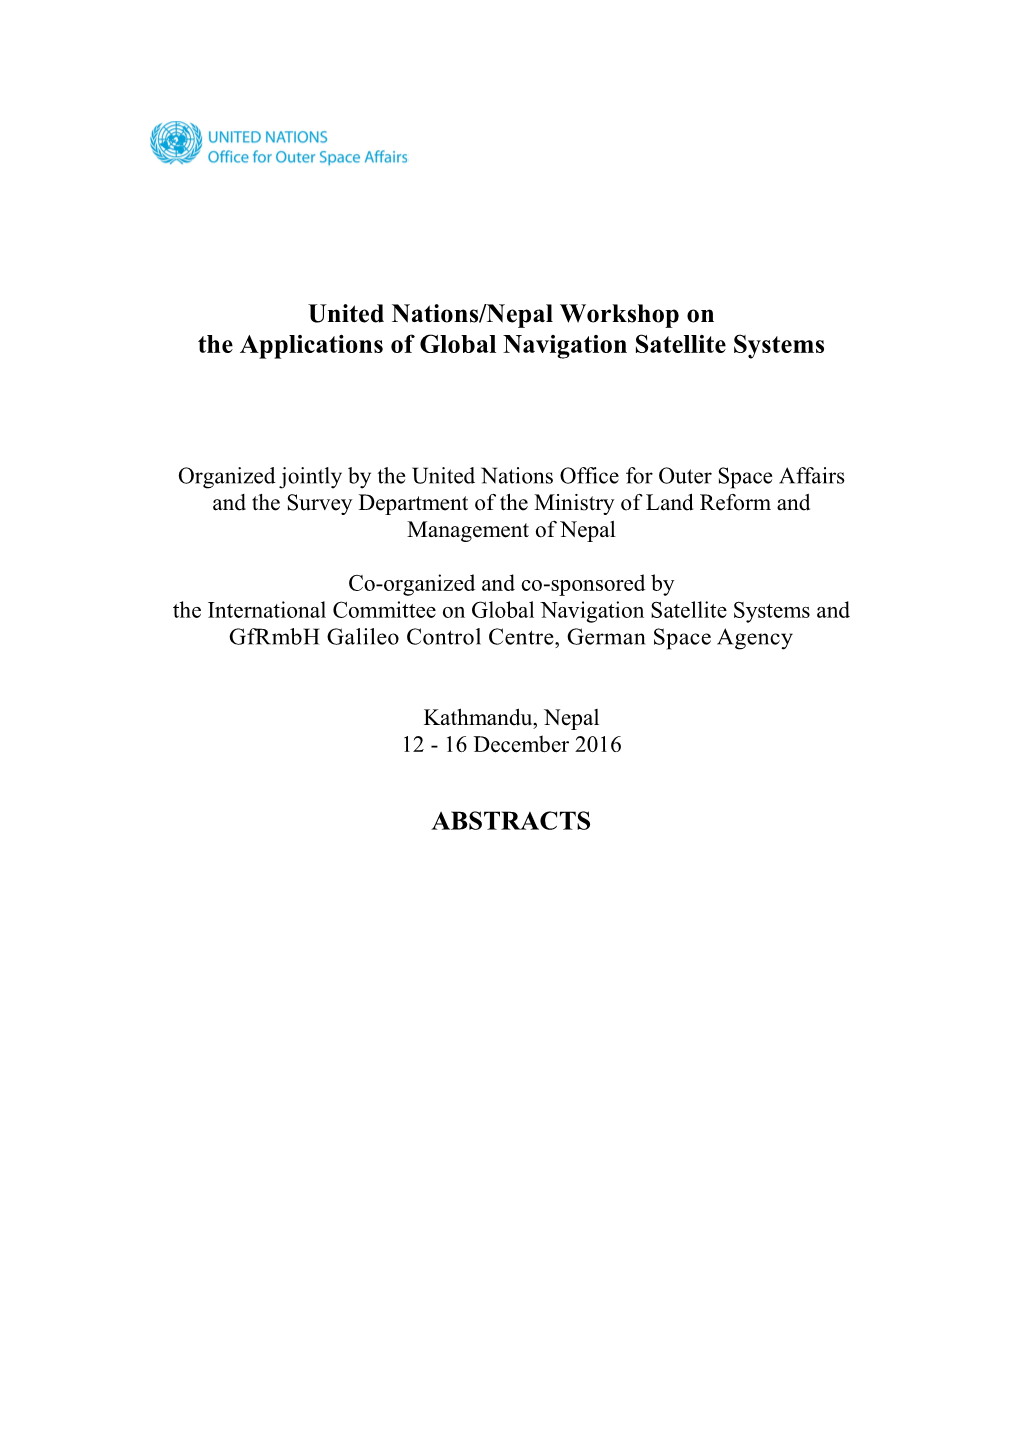 United Nations/Nepal Workshop on the Applications of Global Navigation Satellite Systems